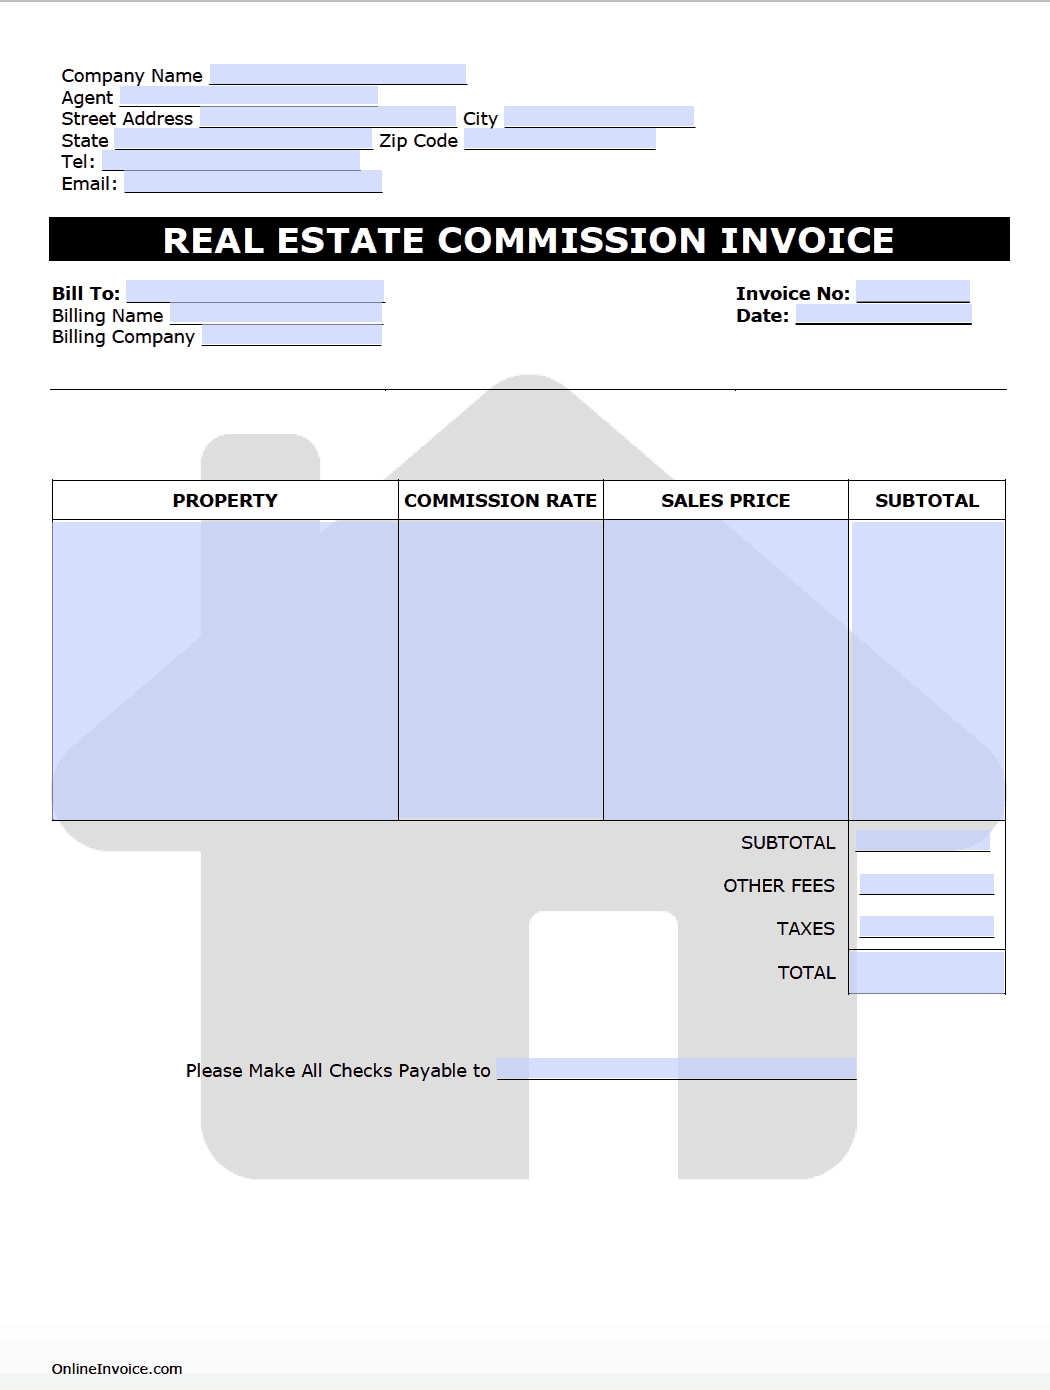 real estate commission invoice template onlineinvoice real estate agent invoice template